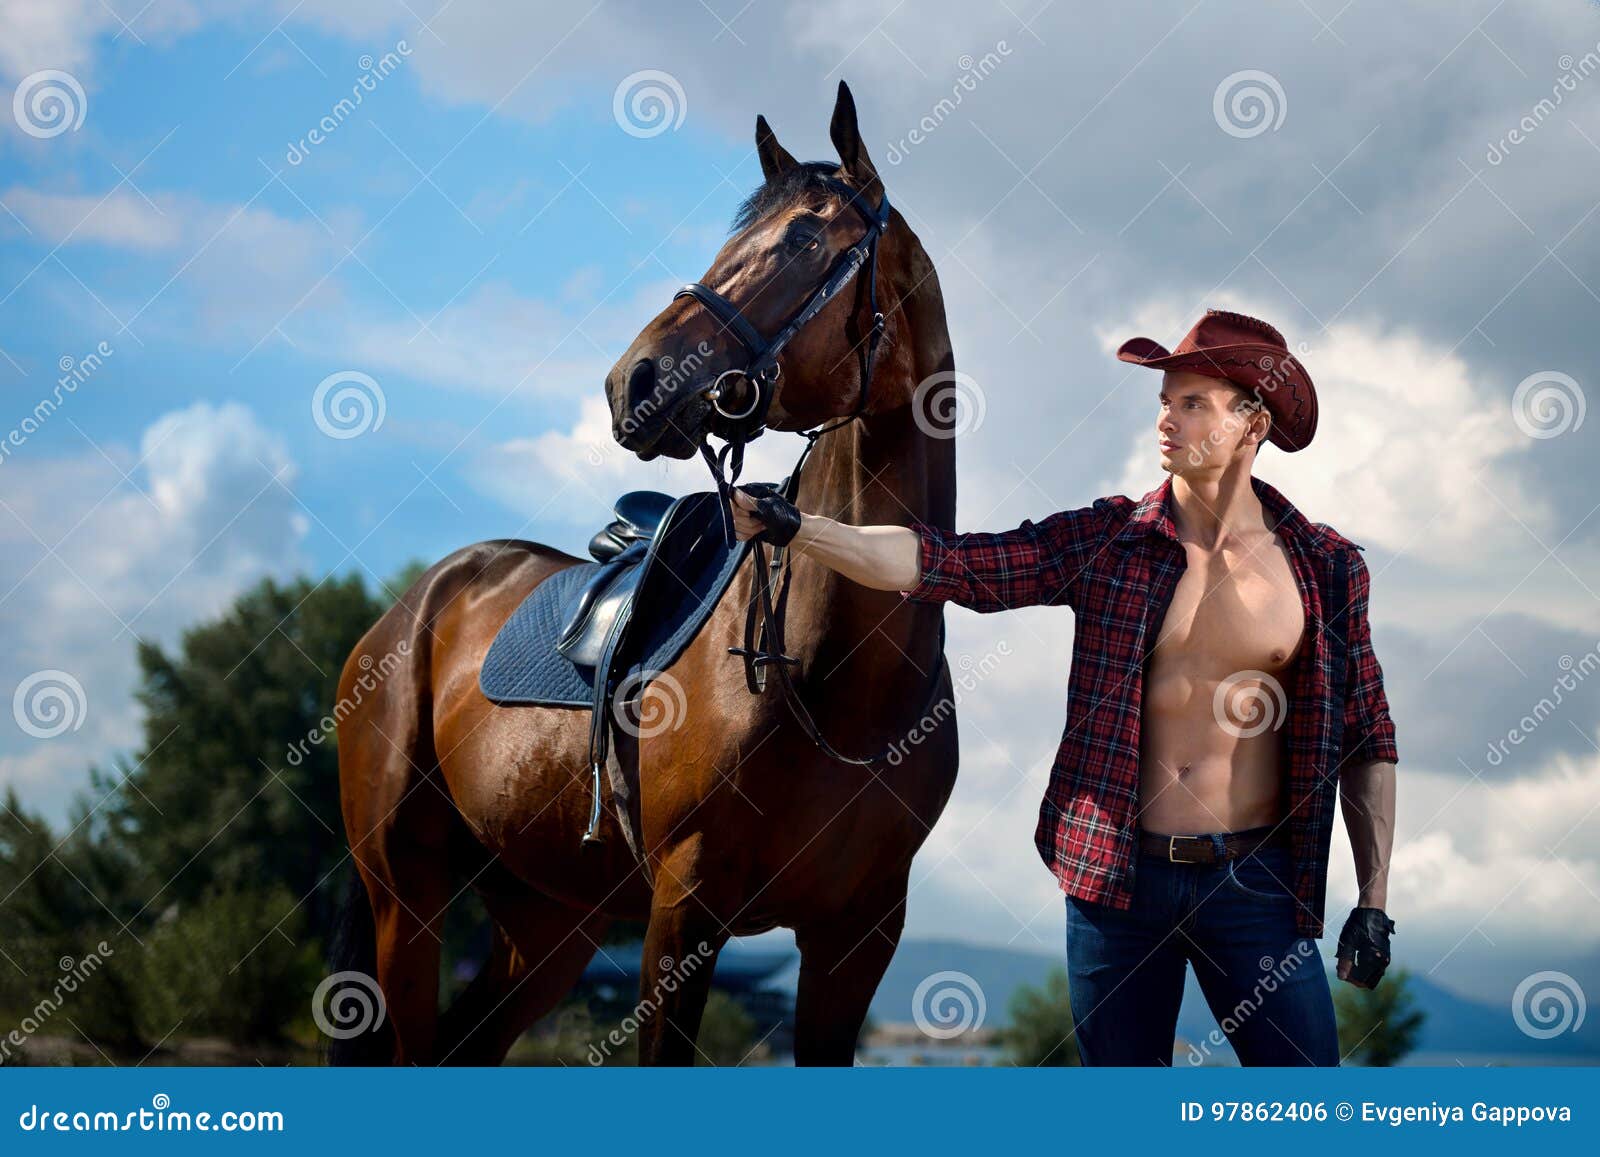 macho man handsome cowboy and horse on the background of sky and water.